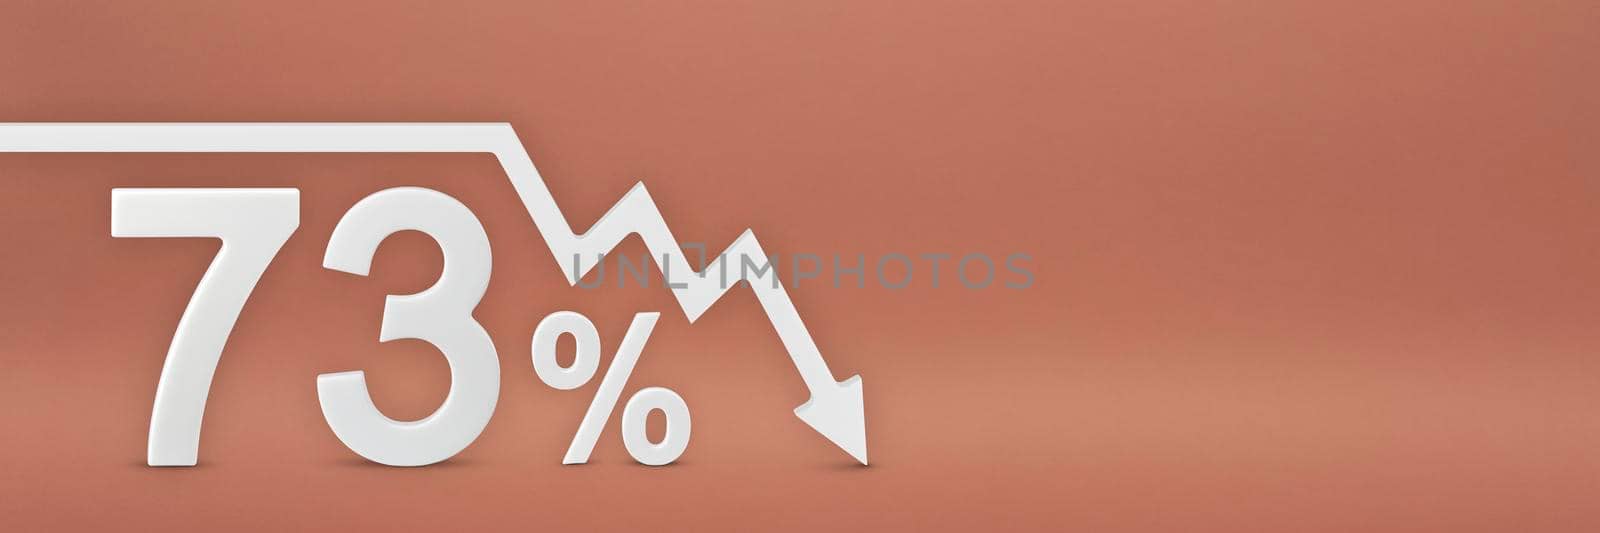 seventy-three percent, the arrow on the graph is pointing down. Stock market crash, bear market, inflation.Economic collapse, collapse of stocks.3d banner,73 percent discount sign on a red background. by SERSOL